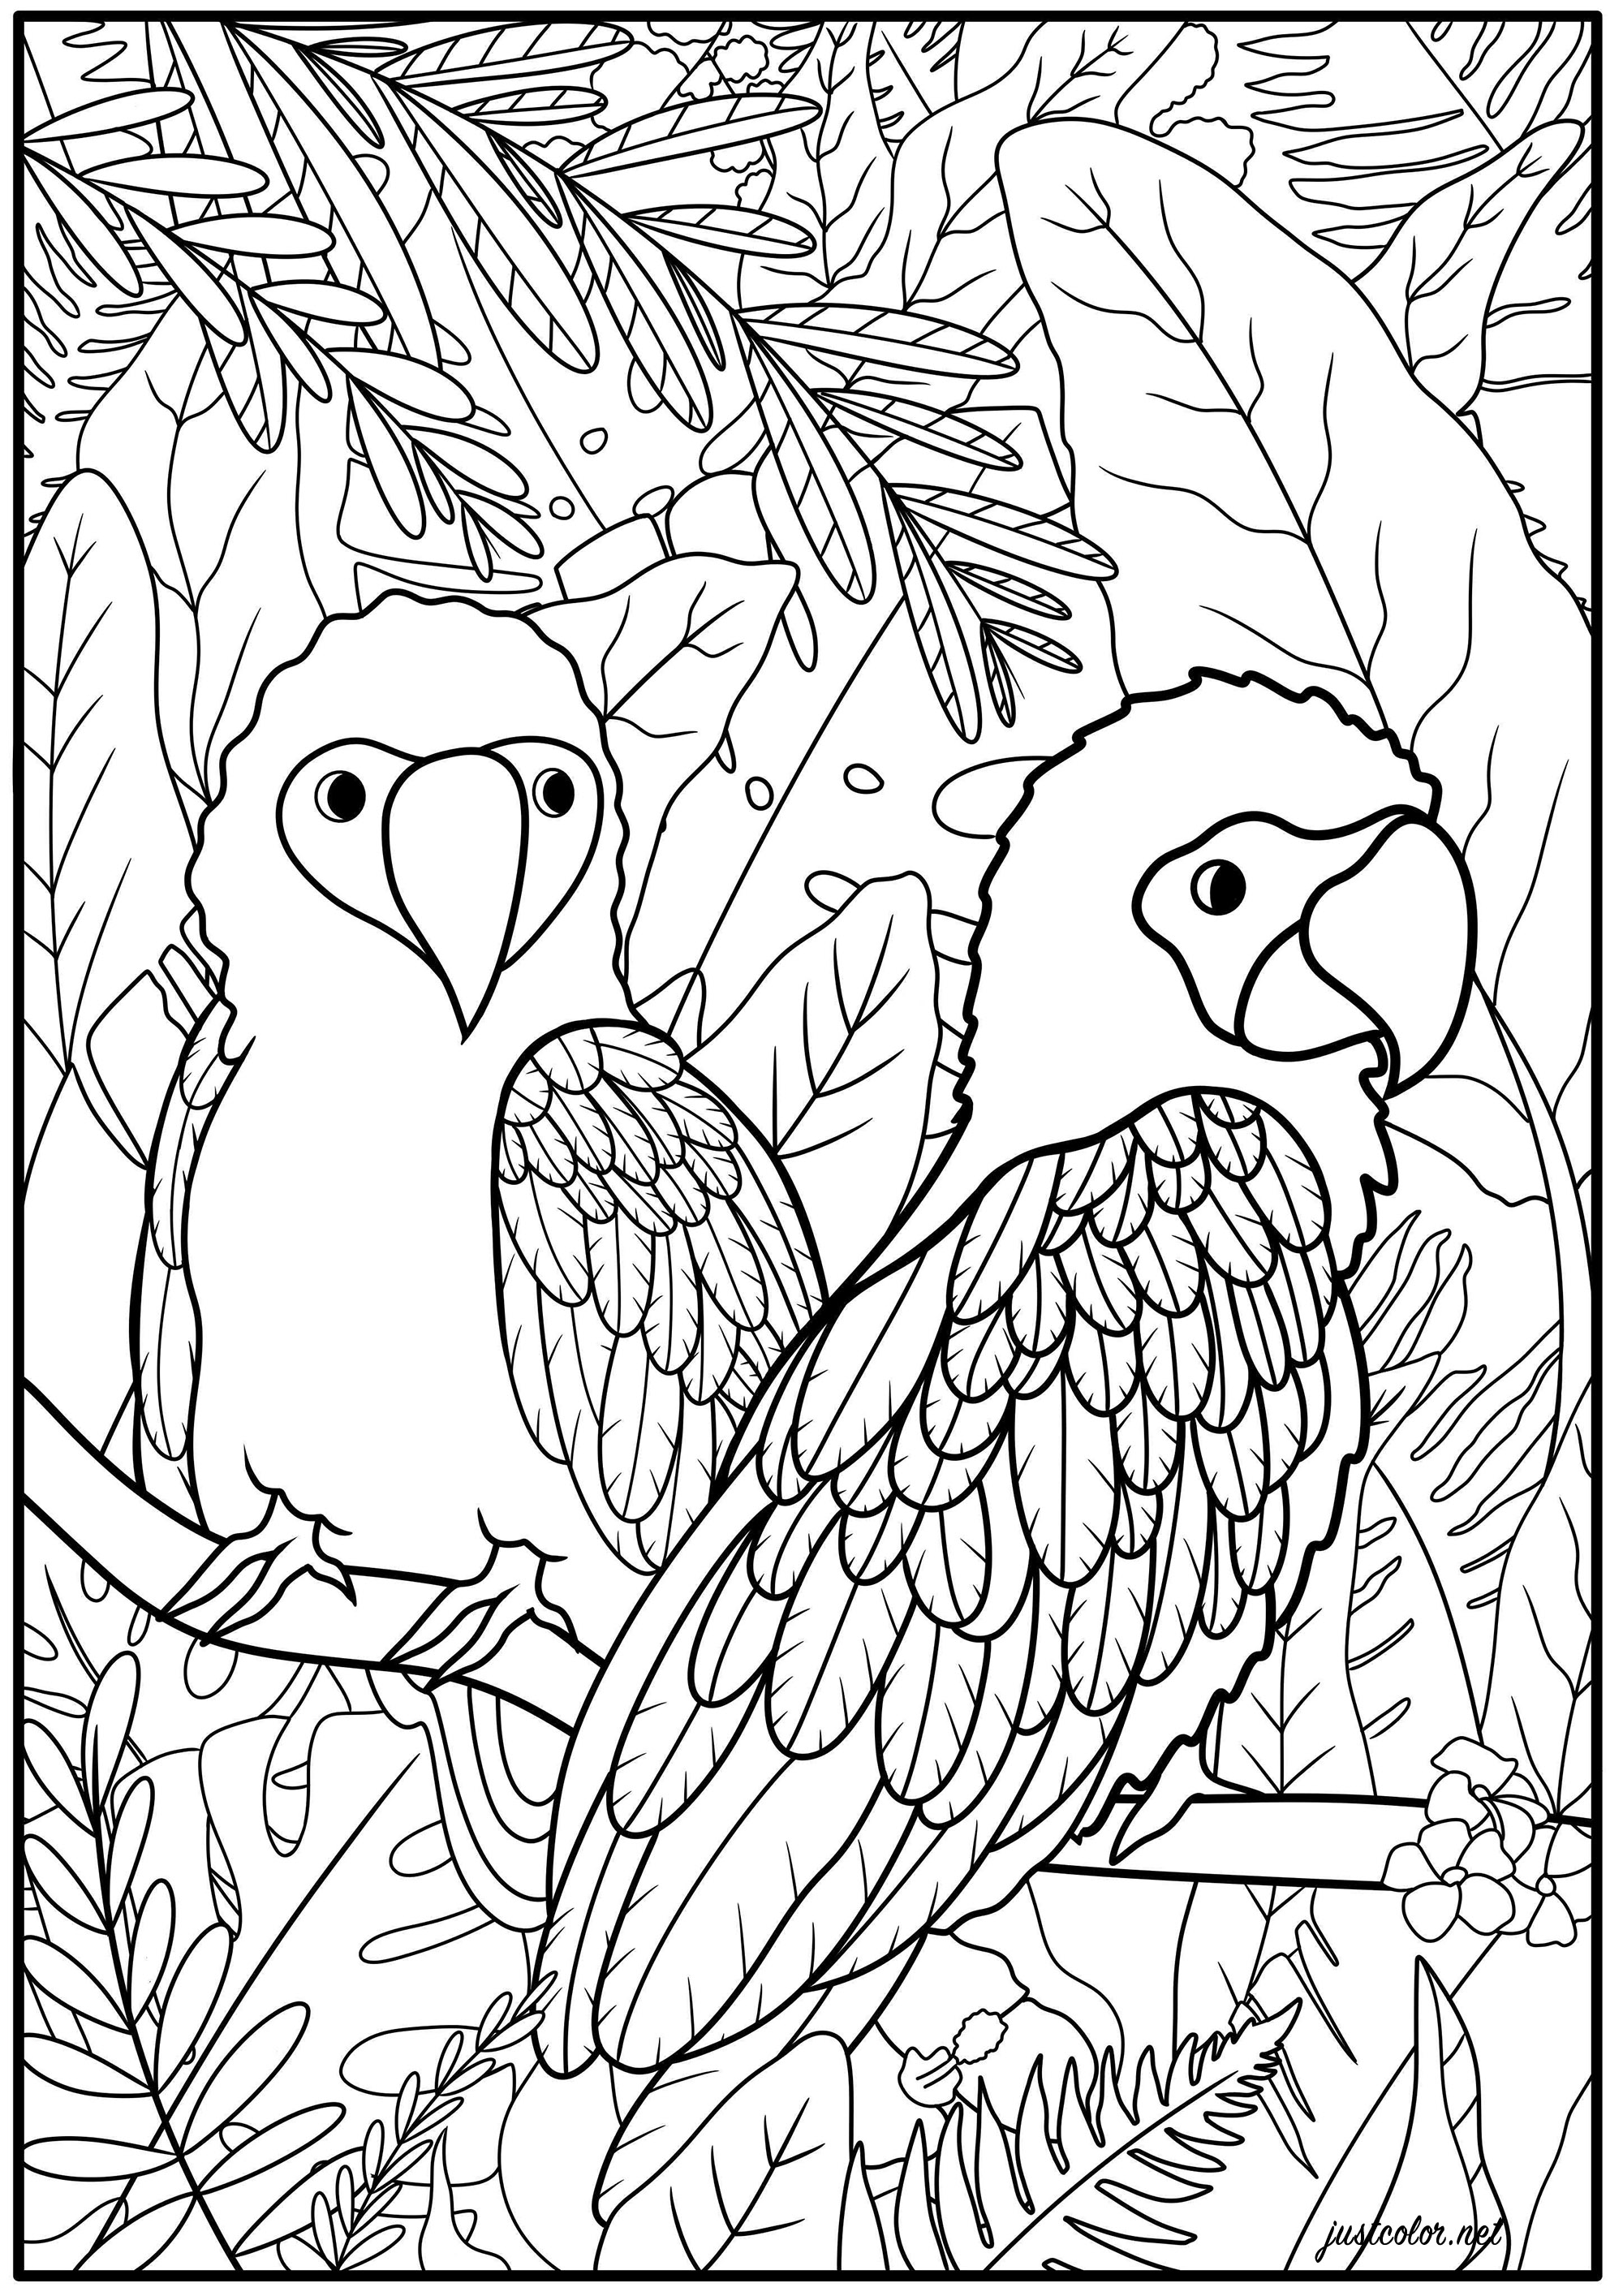 Two parrots in their natural habitat, consisting of exotic plants, Artist : Océane D